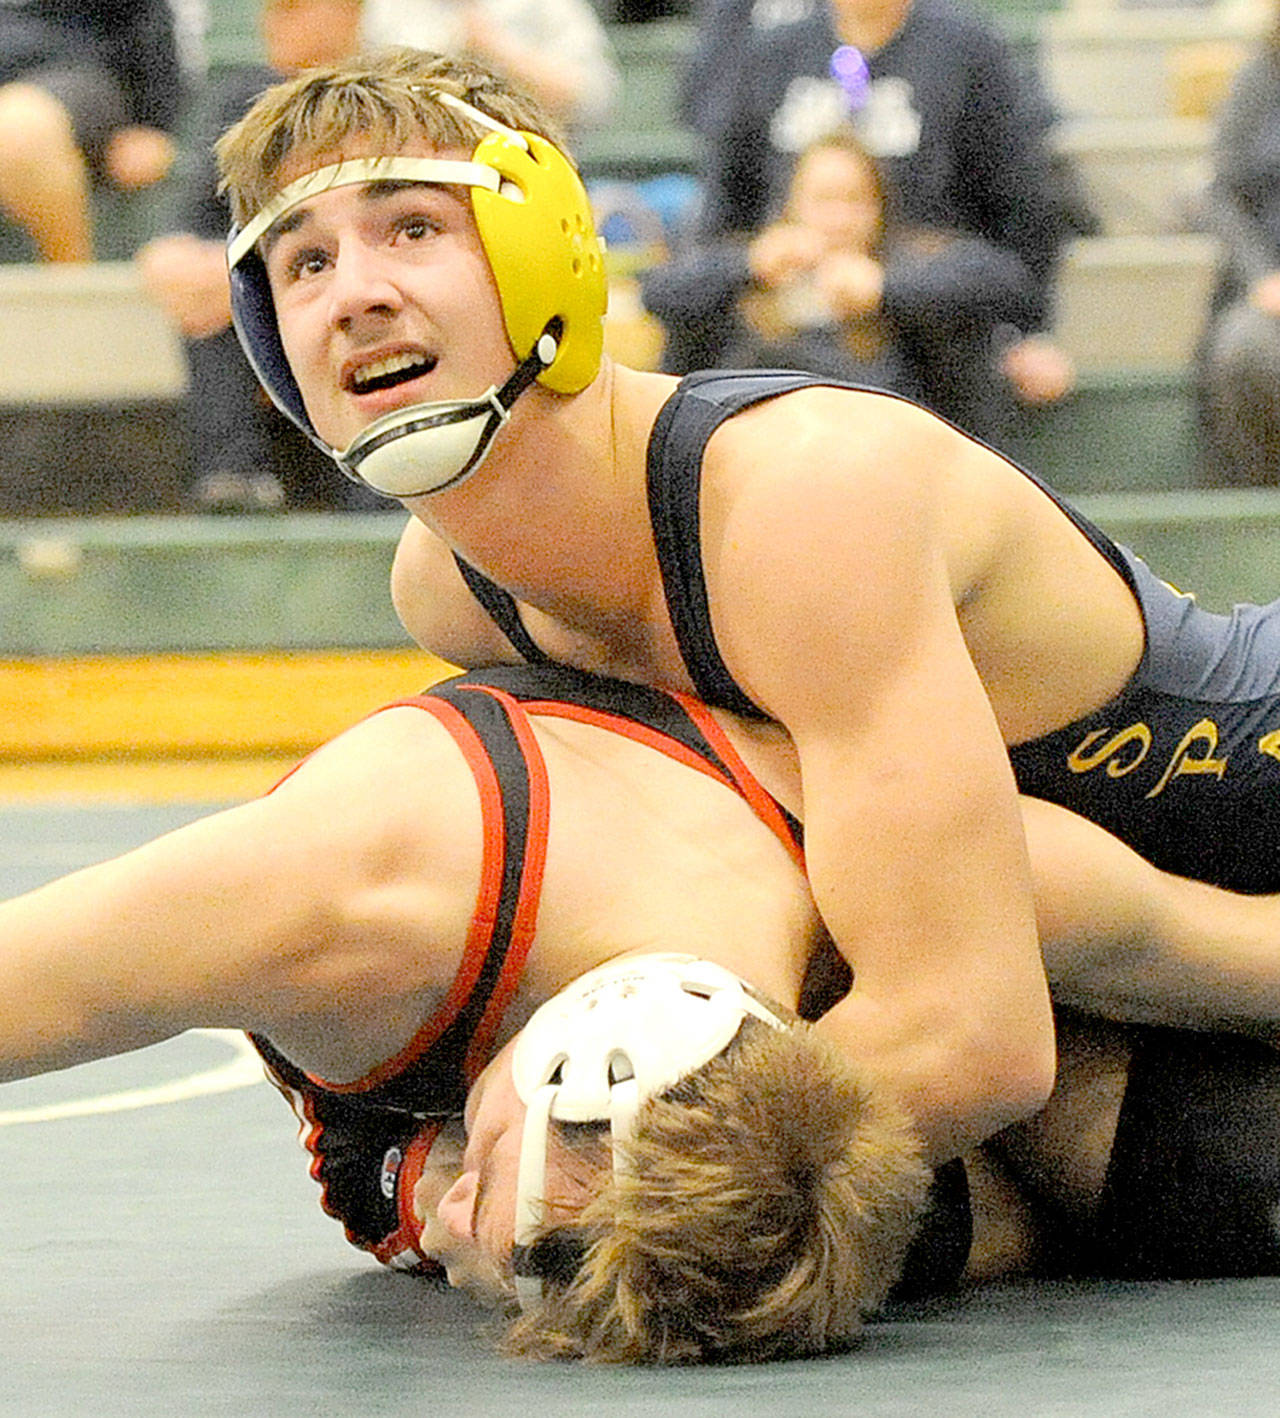 Forks’ Colby Demorest wrestles for the 160-pound championship in the Region 1 meet at Klahowya High School on Saturday. Demorest won the match and will be wrestling at the Mat Classic next weekend. (Lonnie Archibald/for Peninsula Daily News)